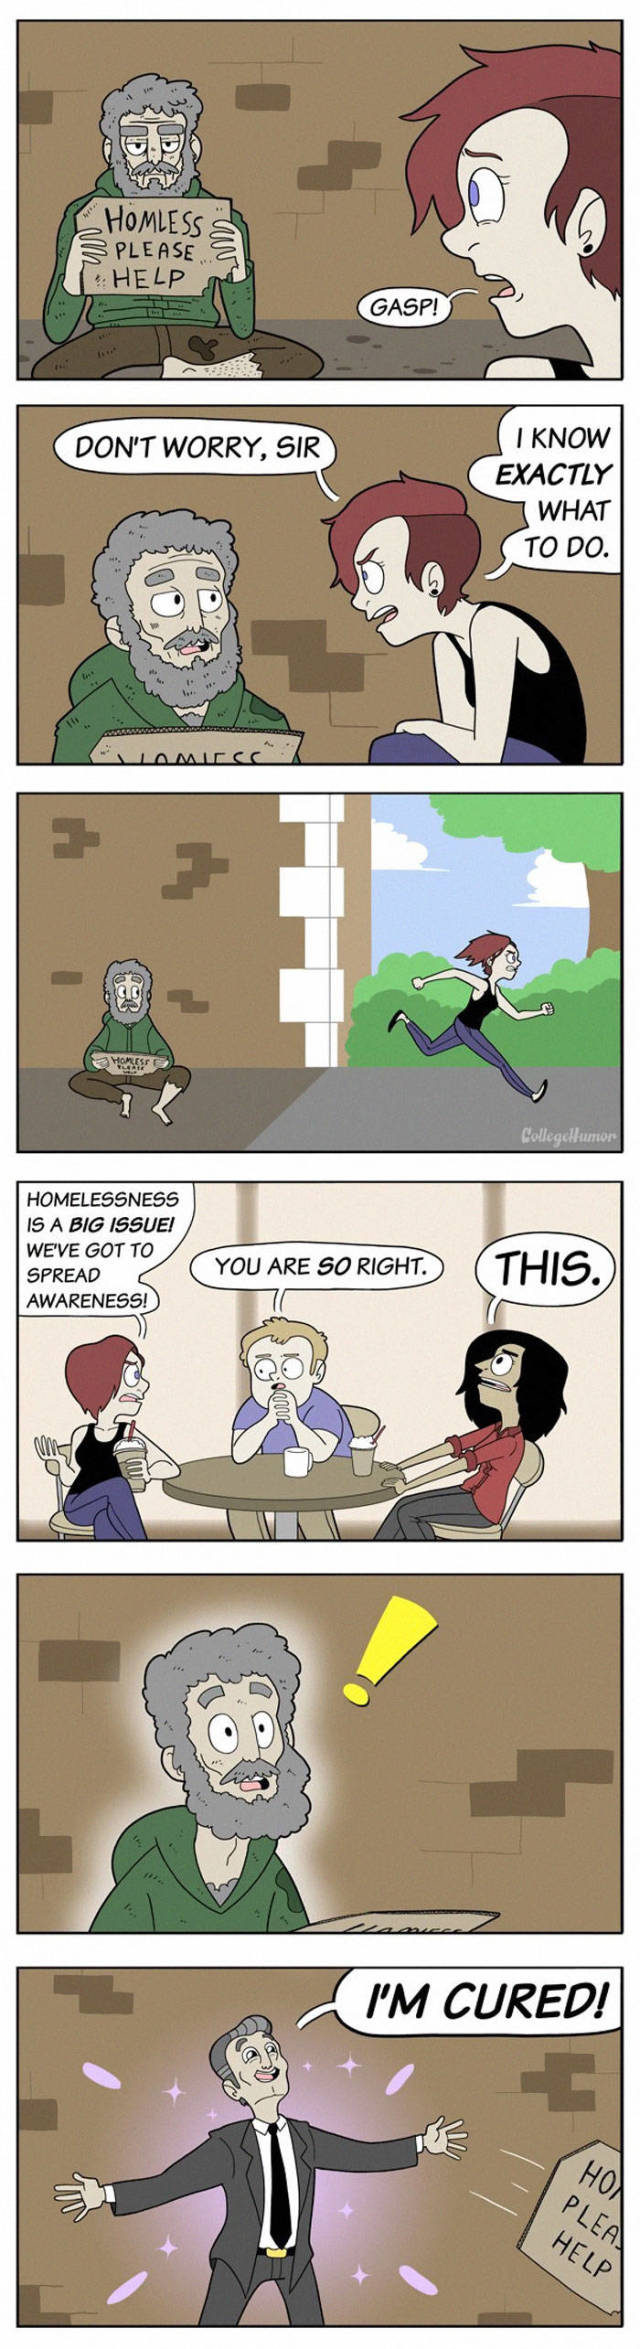 So, These Comics Pretty Much Sum Up What’s Going On Around The Internet